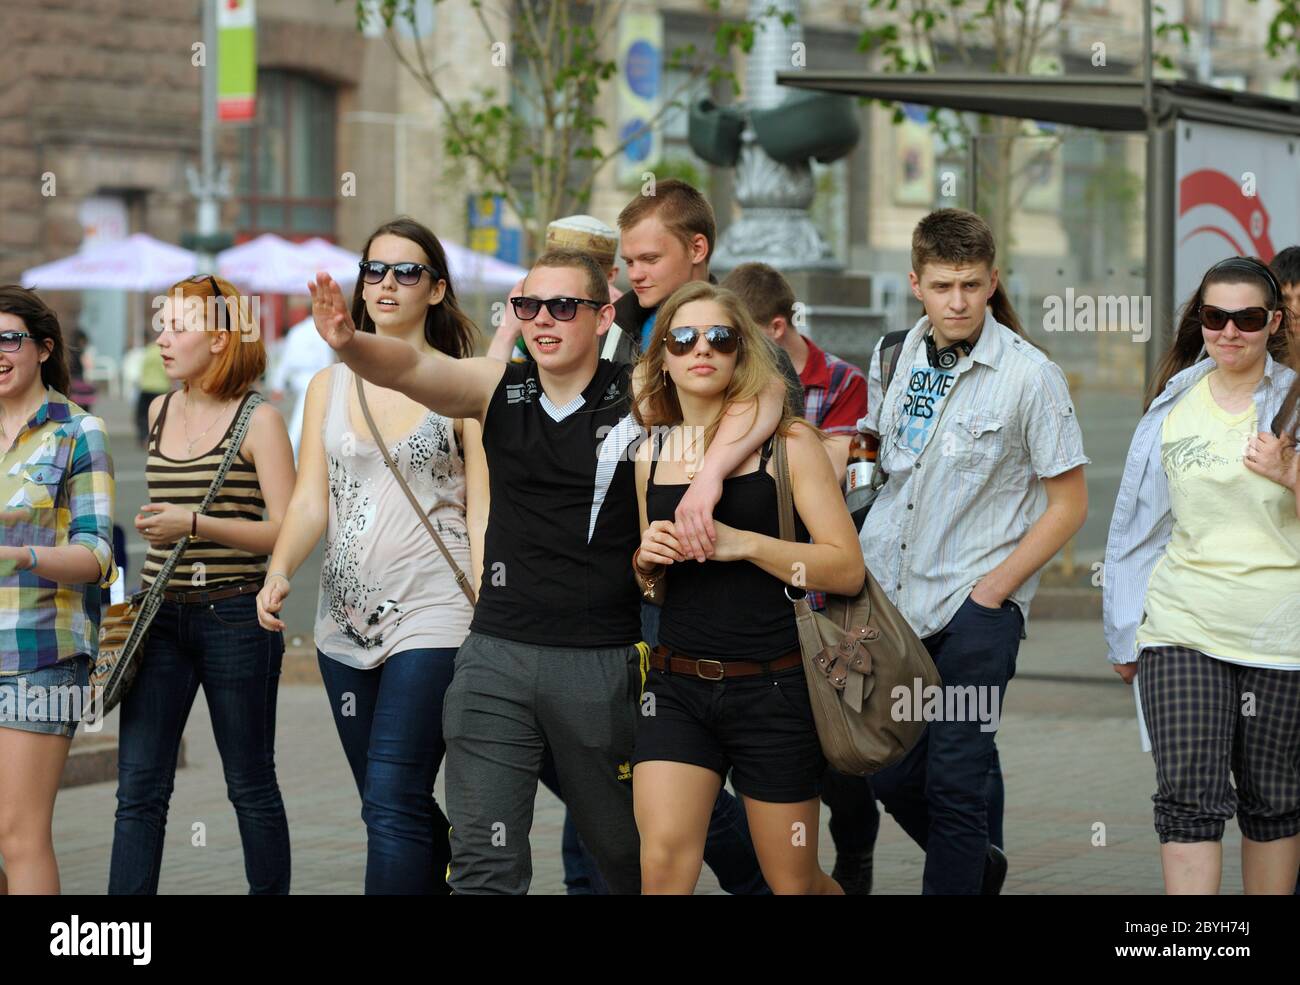 Group of smiling boys and girls walking down the street Stock Photo